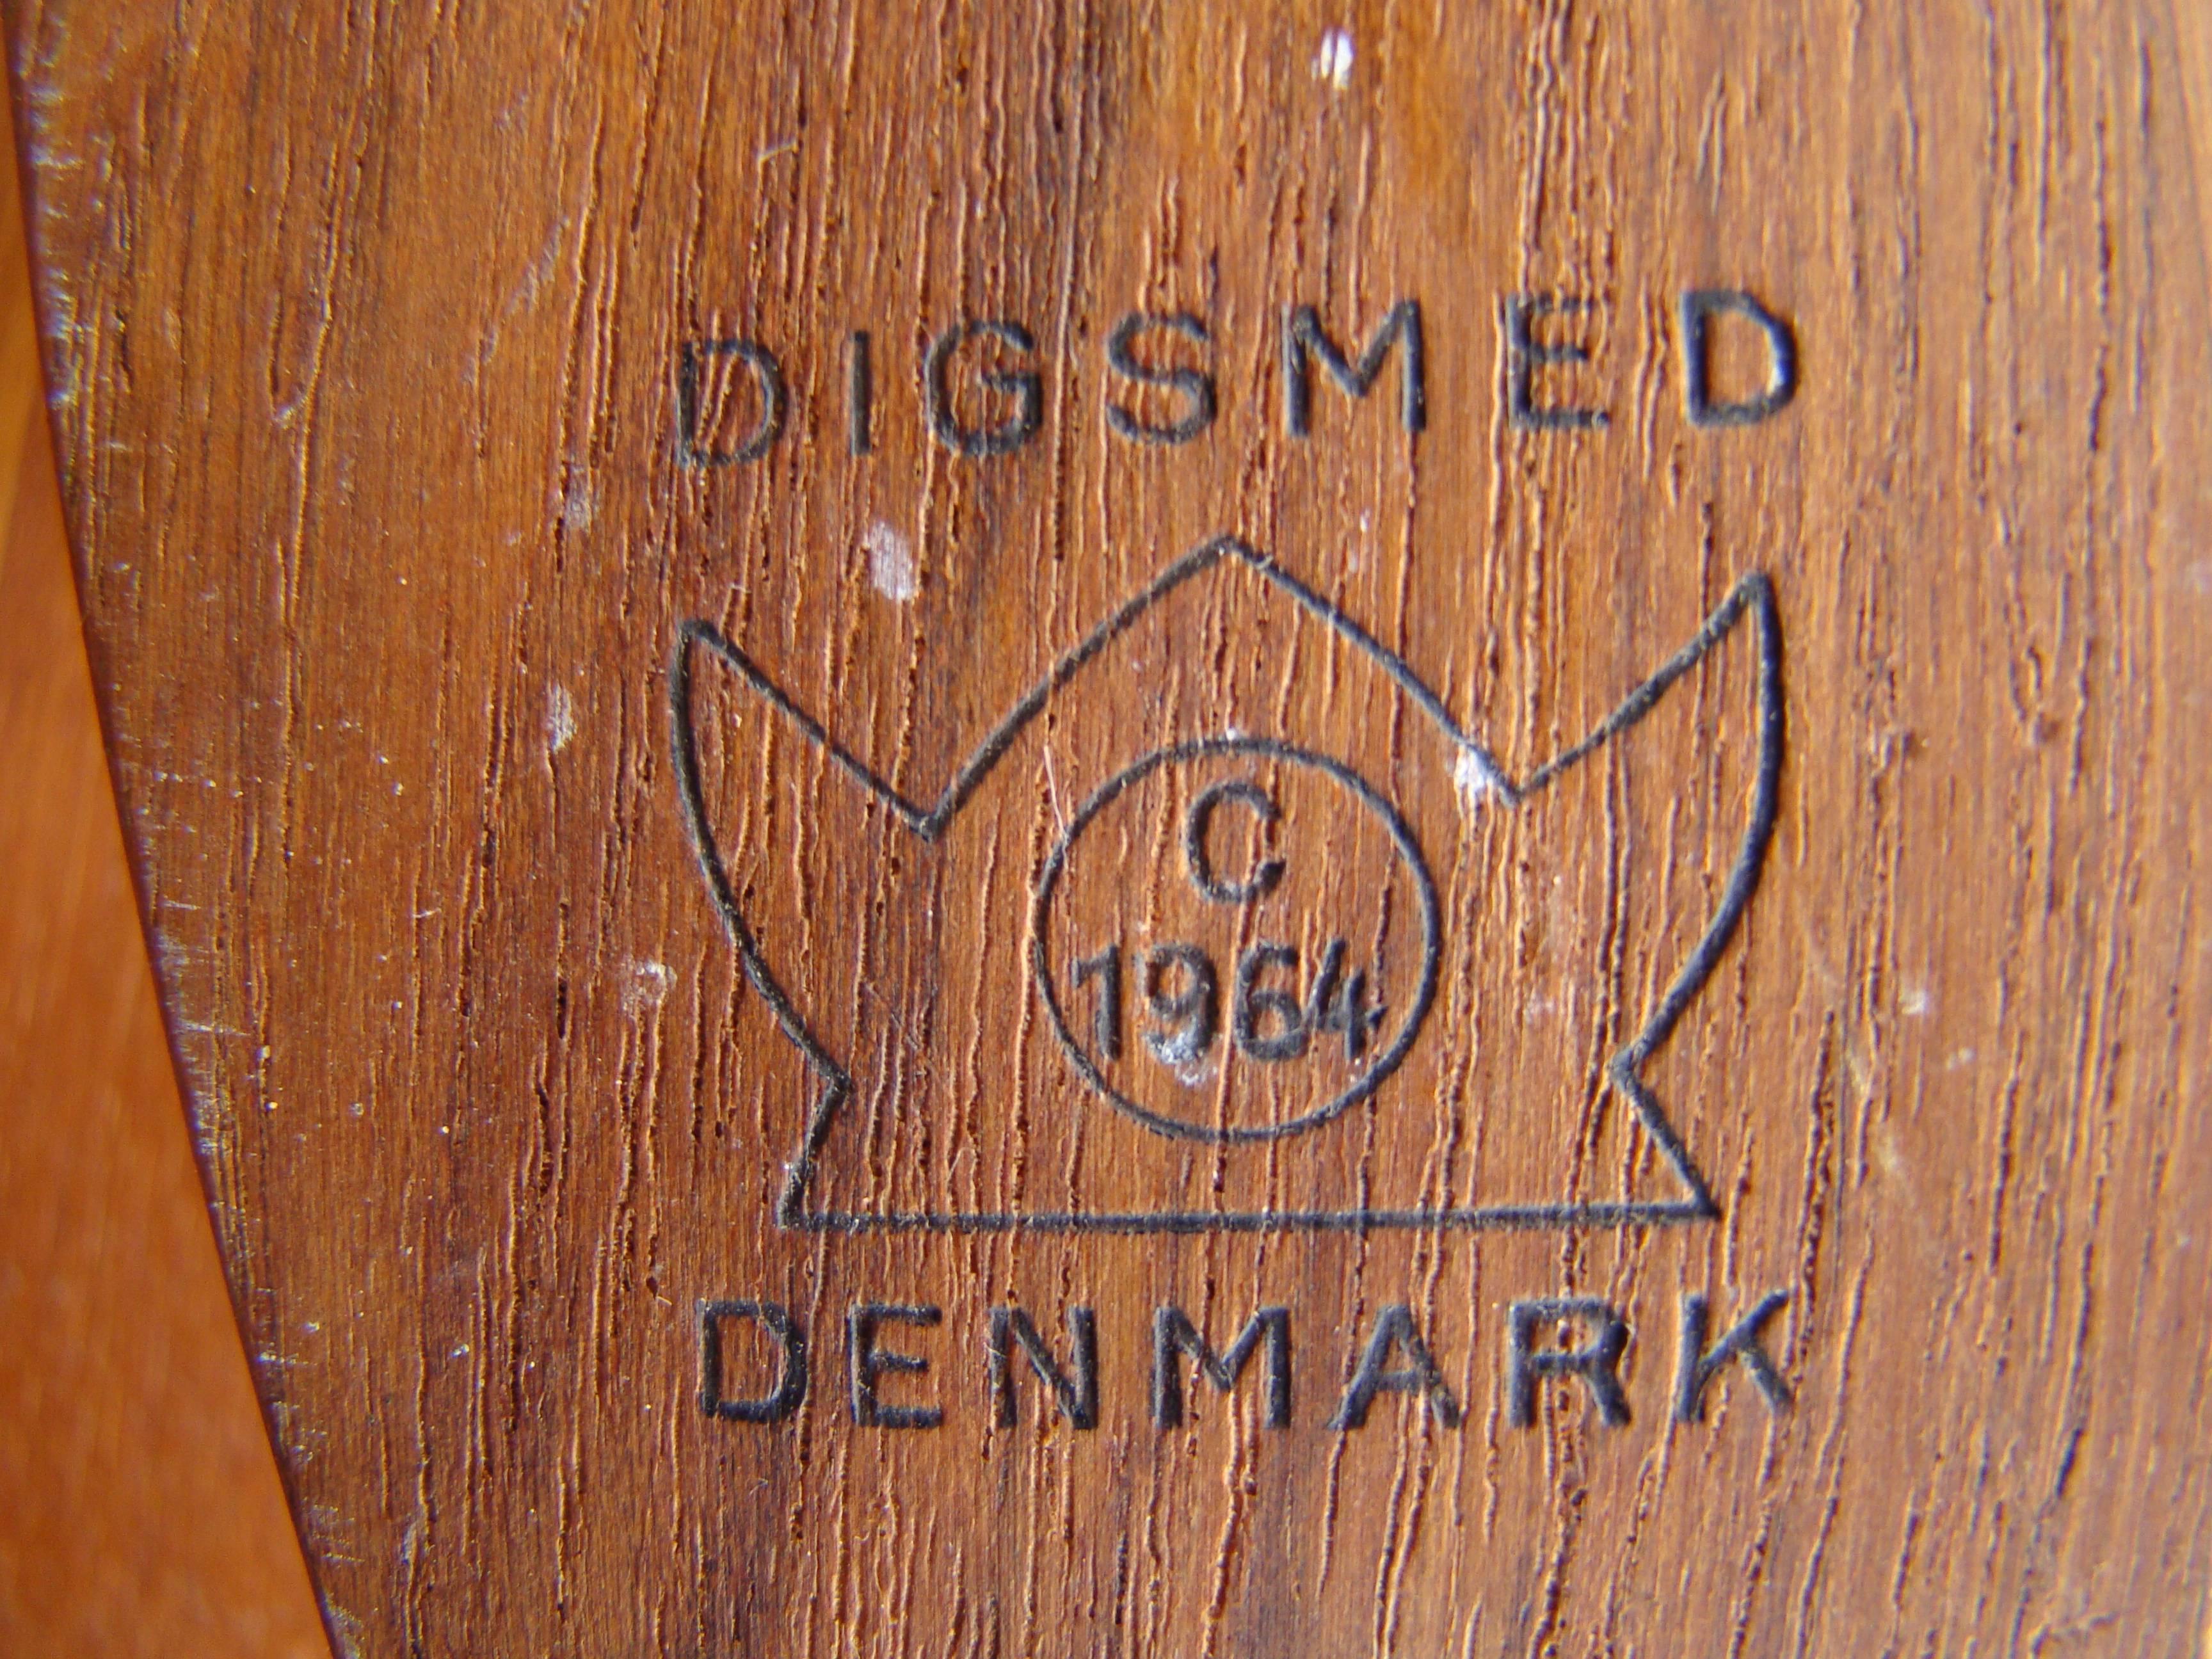 Danish Modern Teak Wall Mount Spinning Spice Rack by Digsmed, Denmark, 1964 In Excellent Condition For Sale In Denver, CO